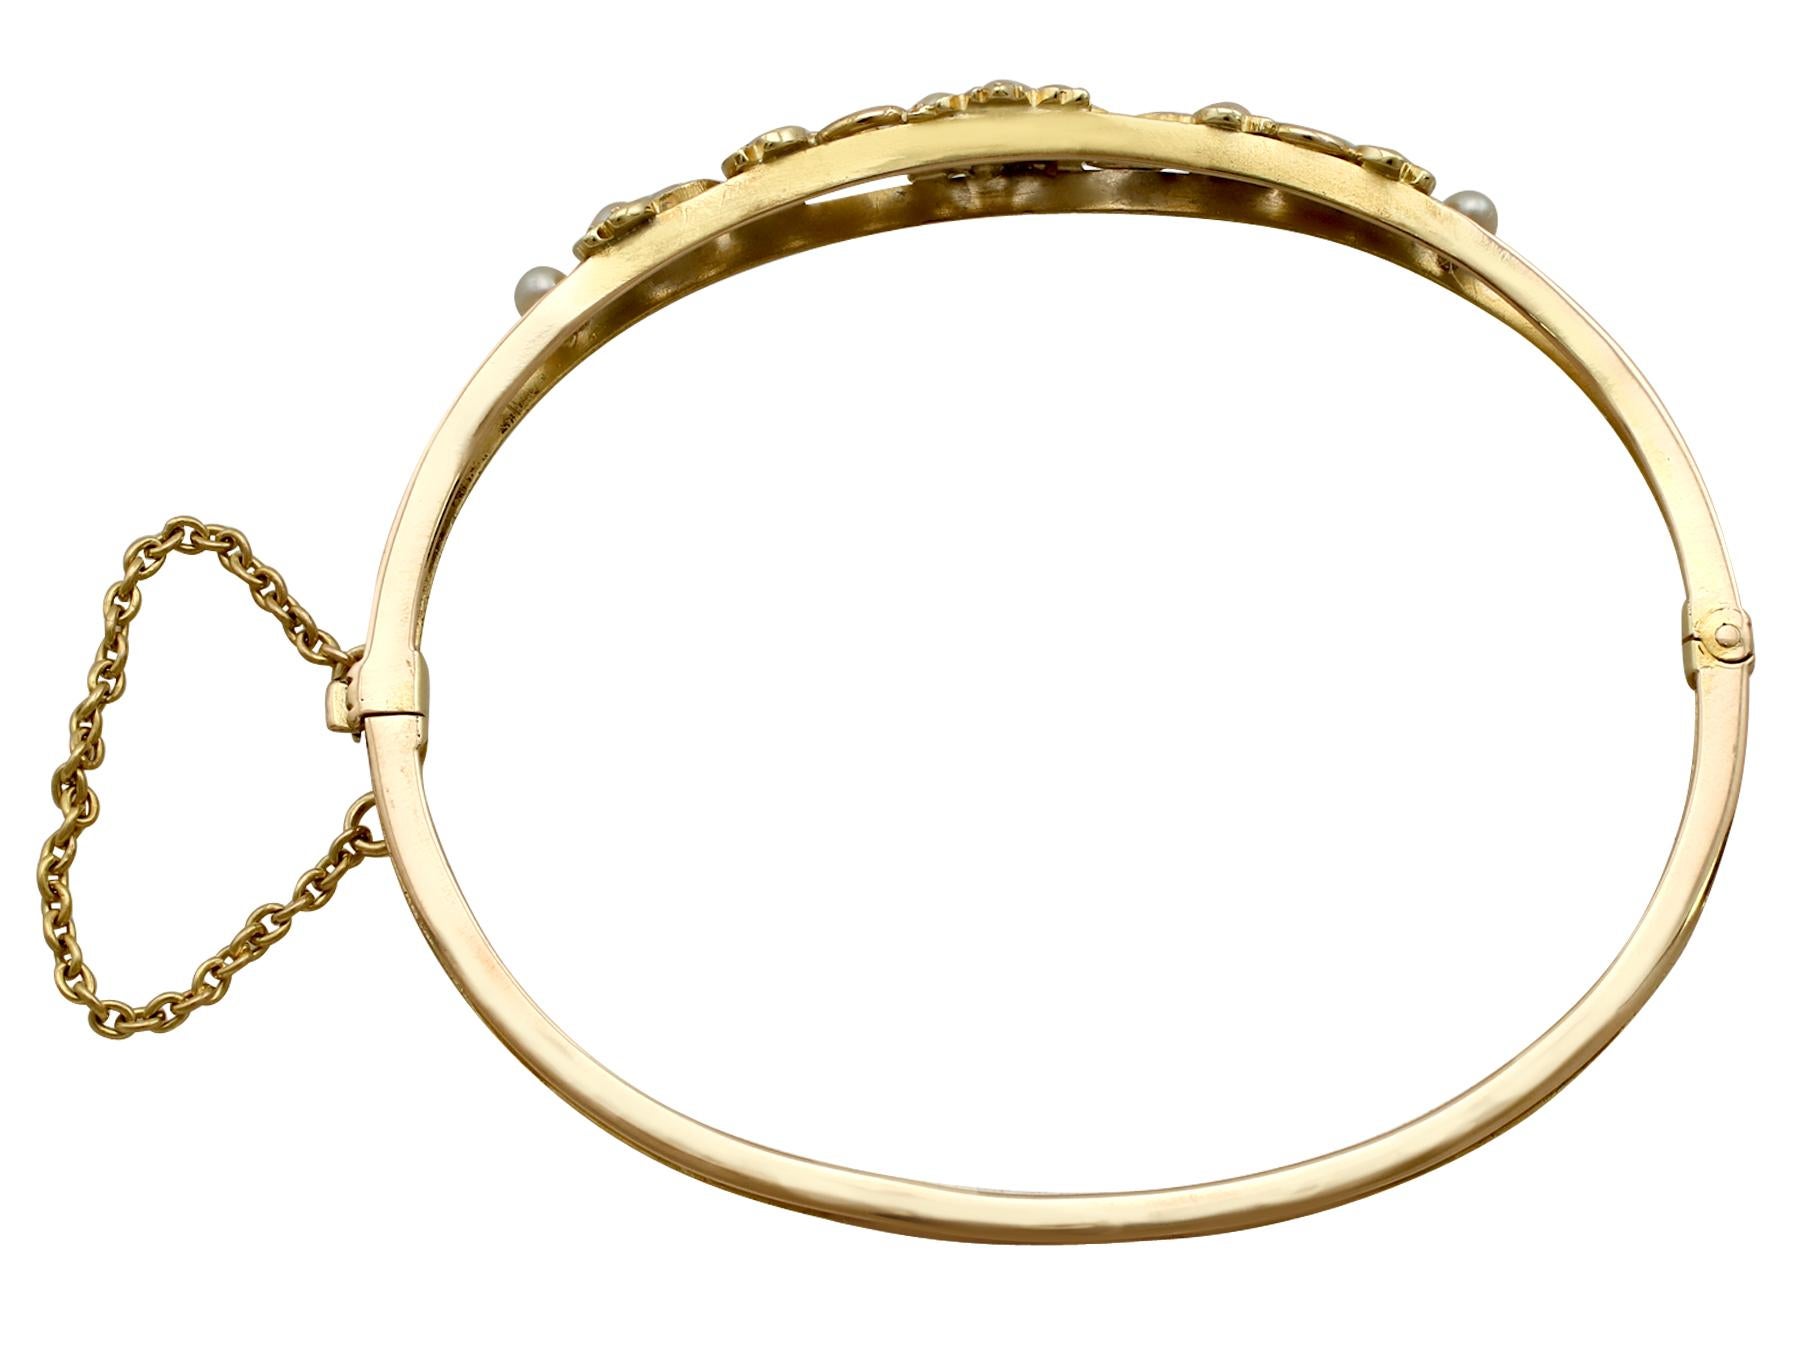 A fine and impressive antique Victorian seed pearl and 15 karat yellow gold bangle; part of our antique jewelry and estate jewelry collections.

This fine and impressive seed pearl bangle has been crafted in 15k yellow gold.

The anterior portion of